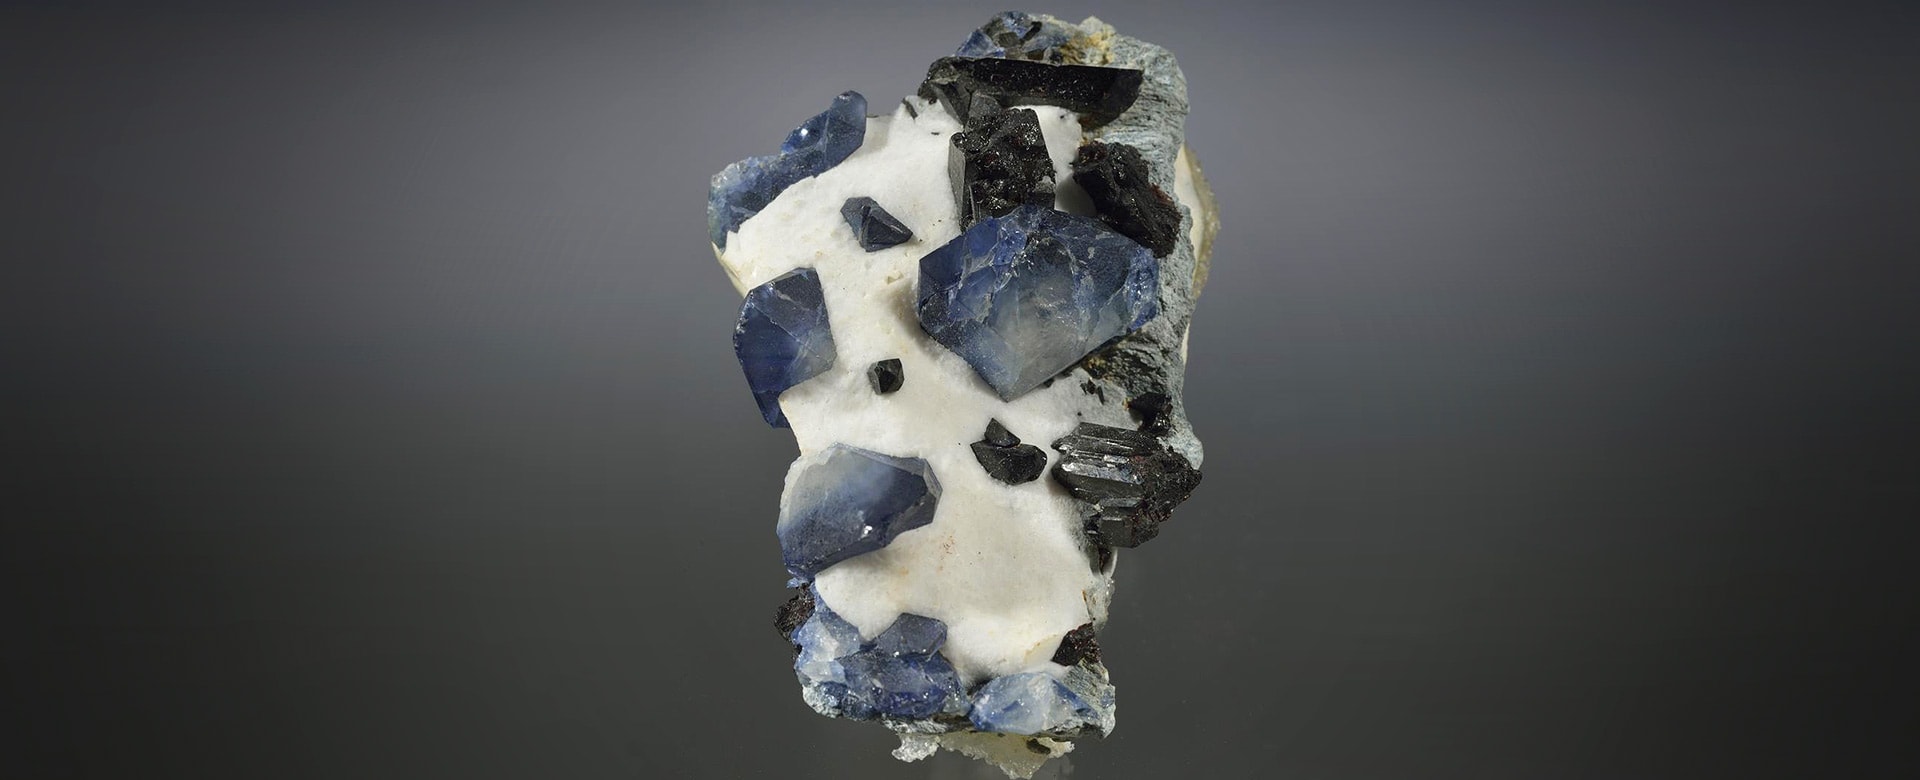 Benitoite Meaning and Properties 1